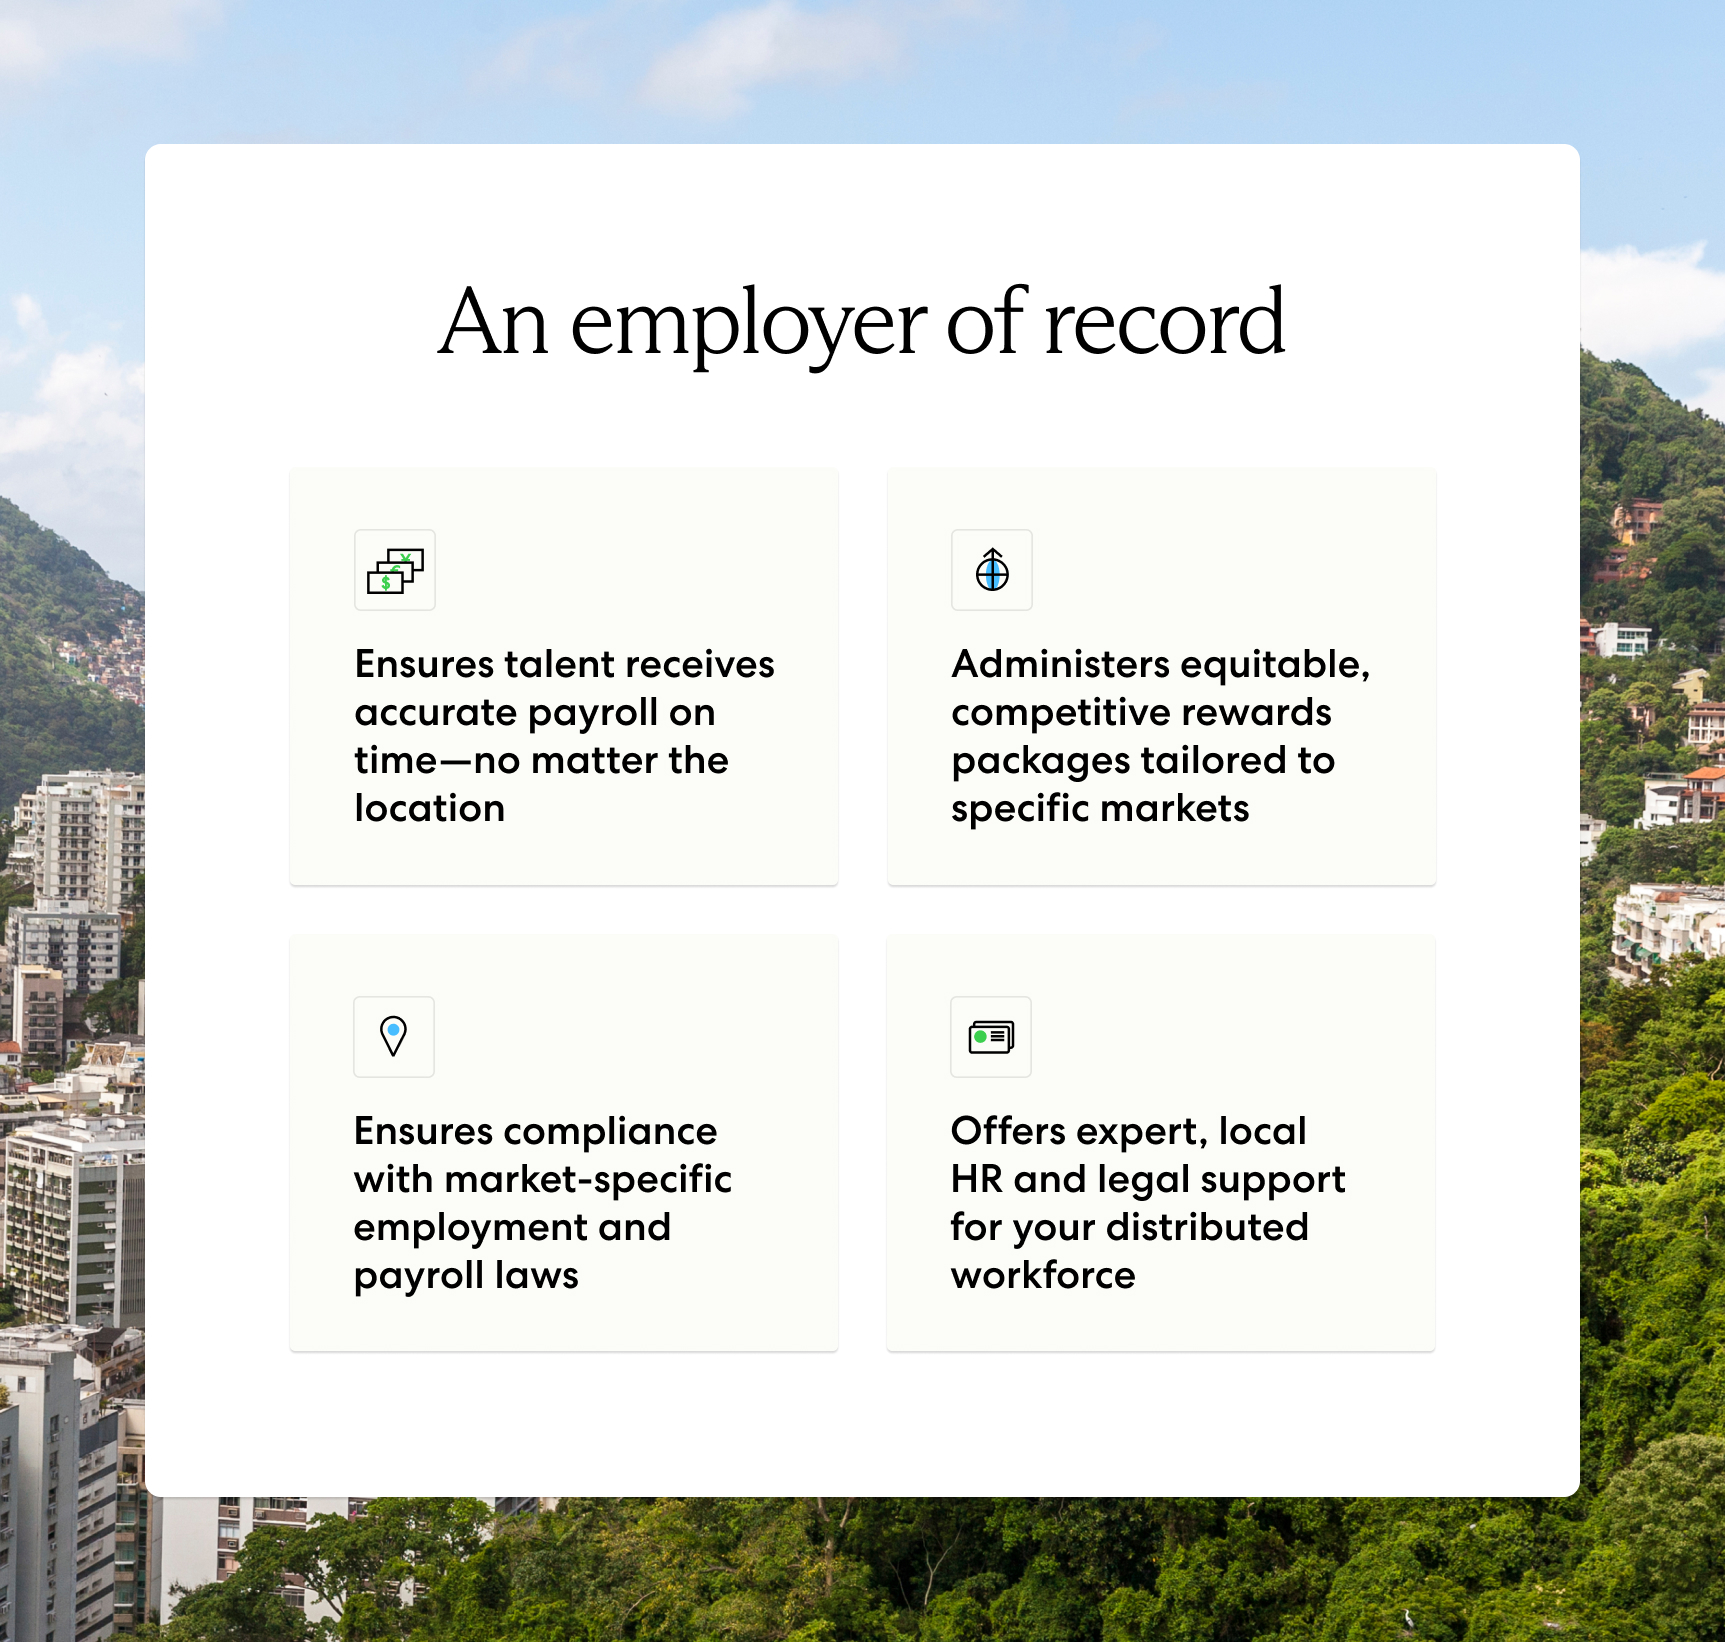 Chart detailing how an employer of record supports an employer’s global compensation strategy